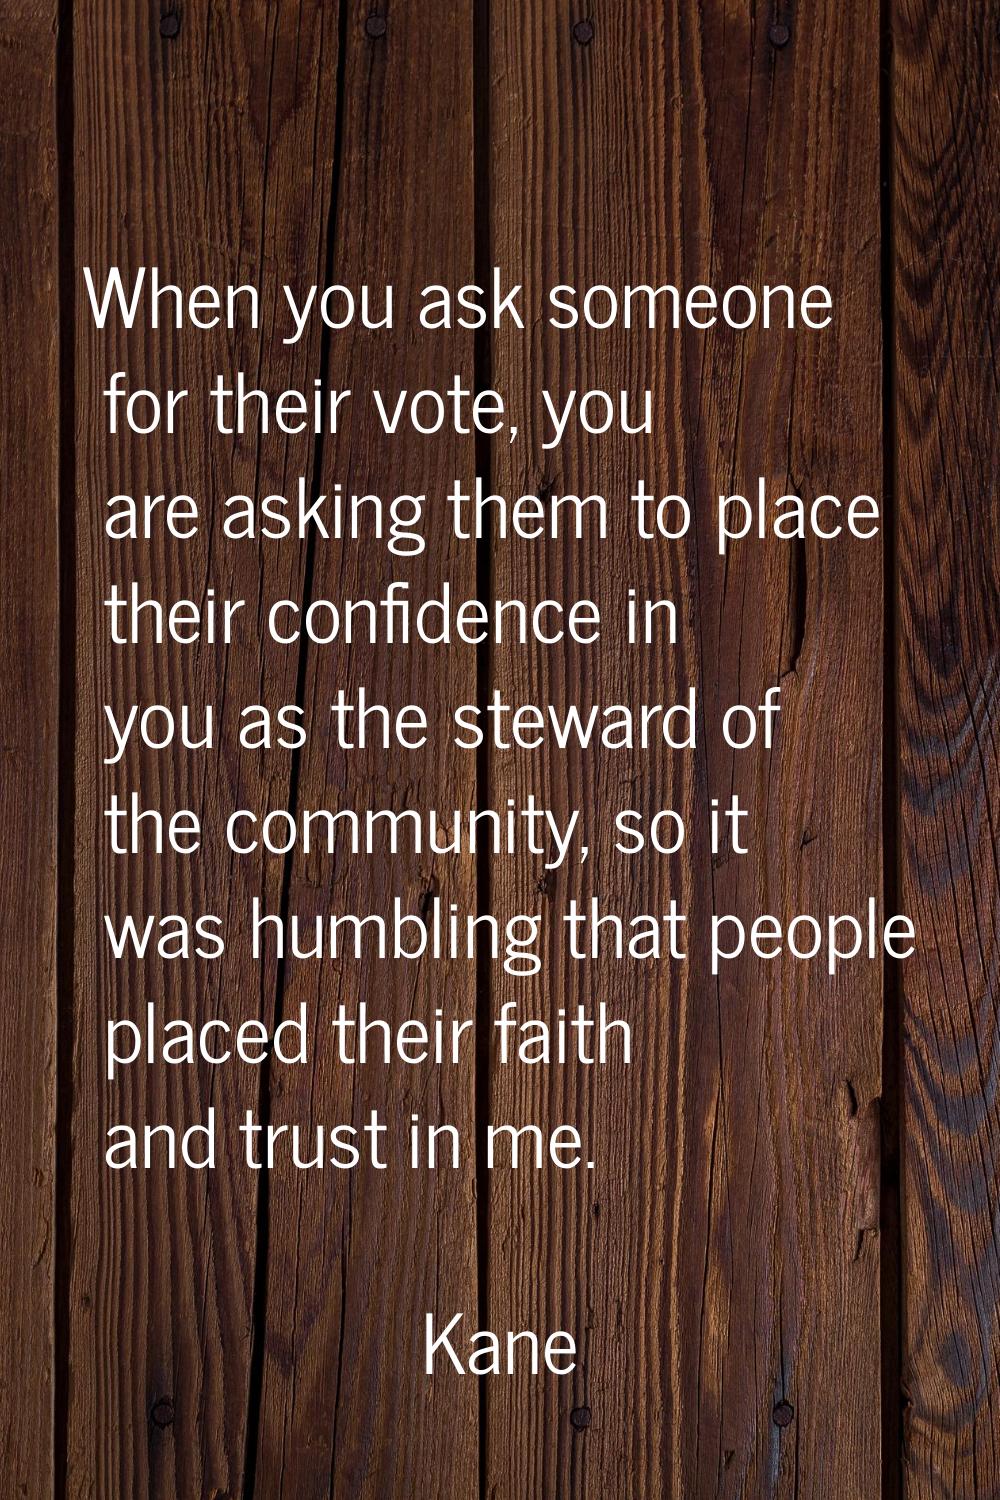 When you ask someone for their vote, you are asking them to place their confidence in you as the st